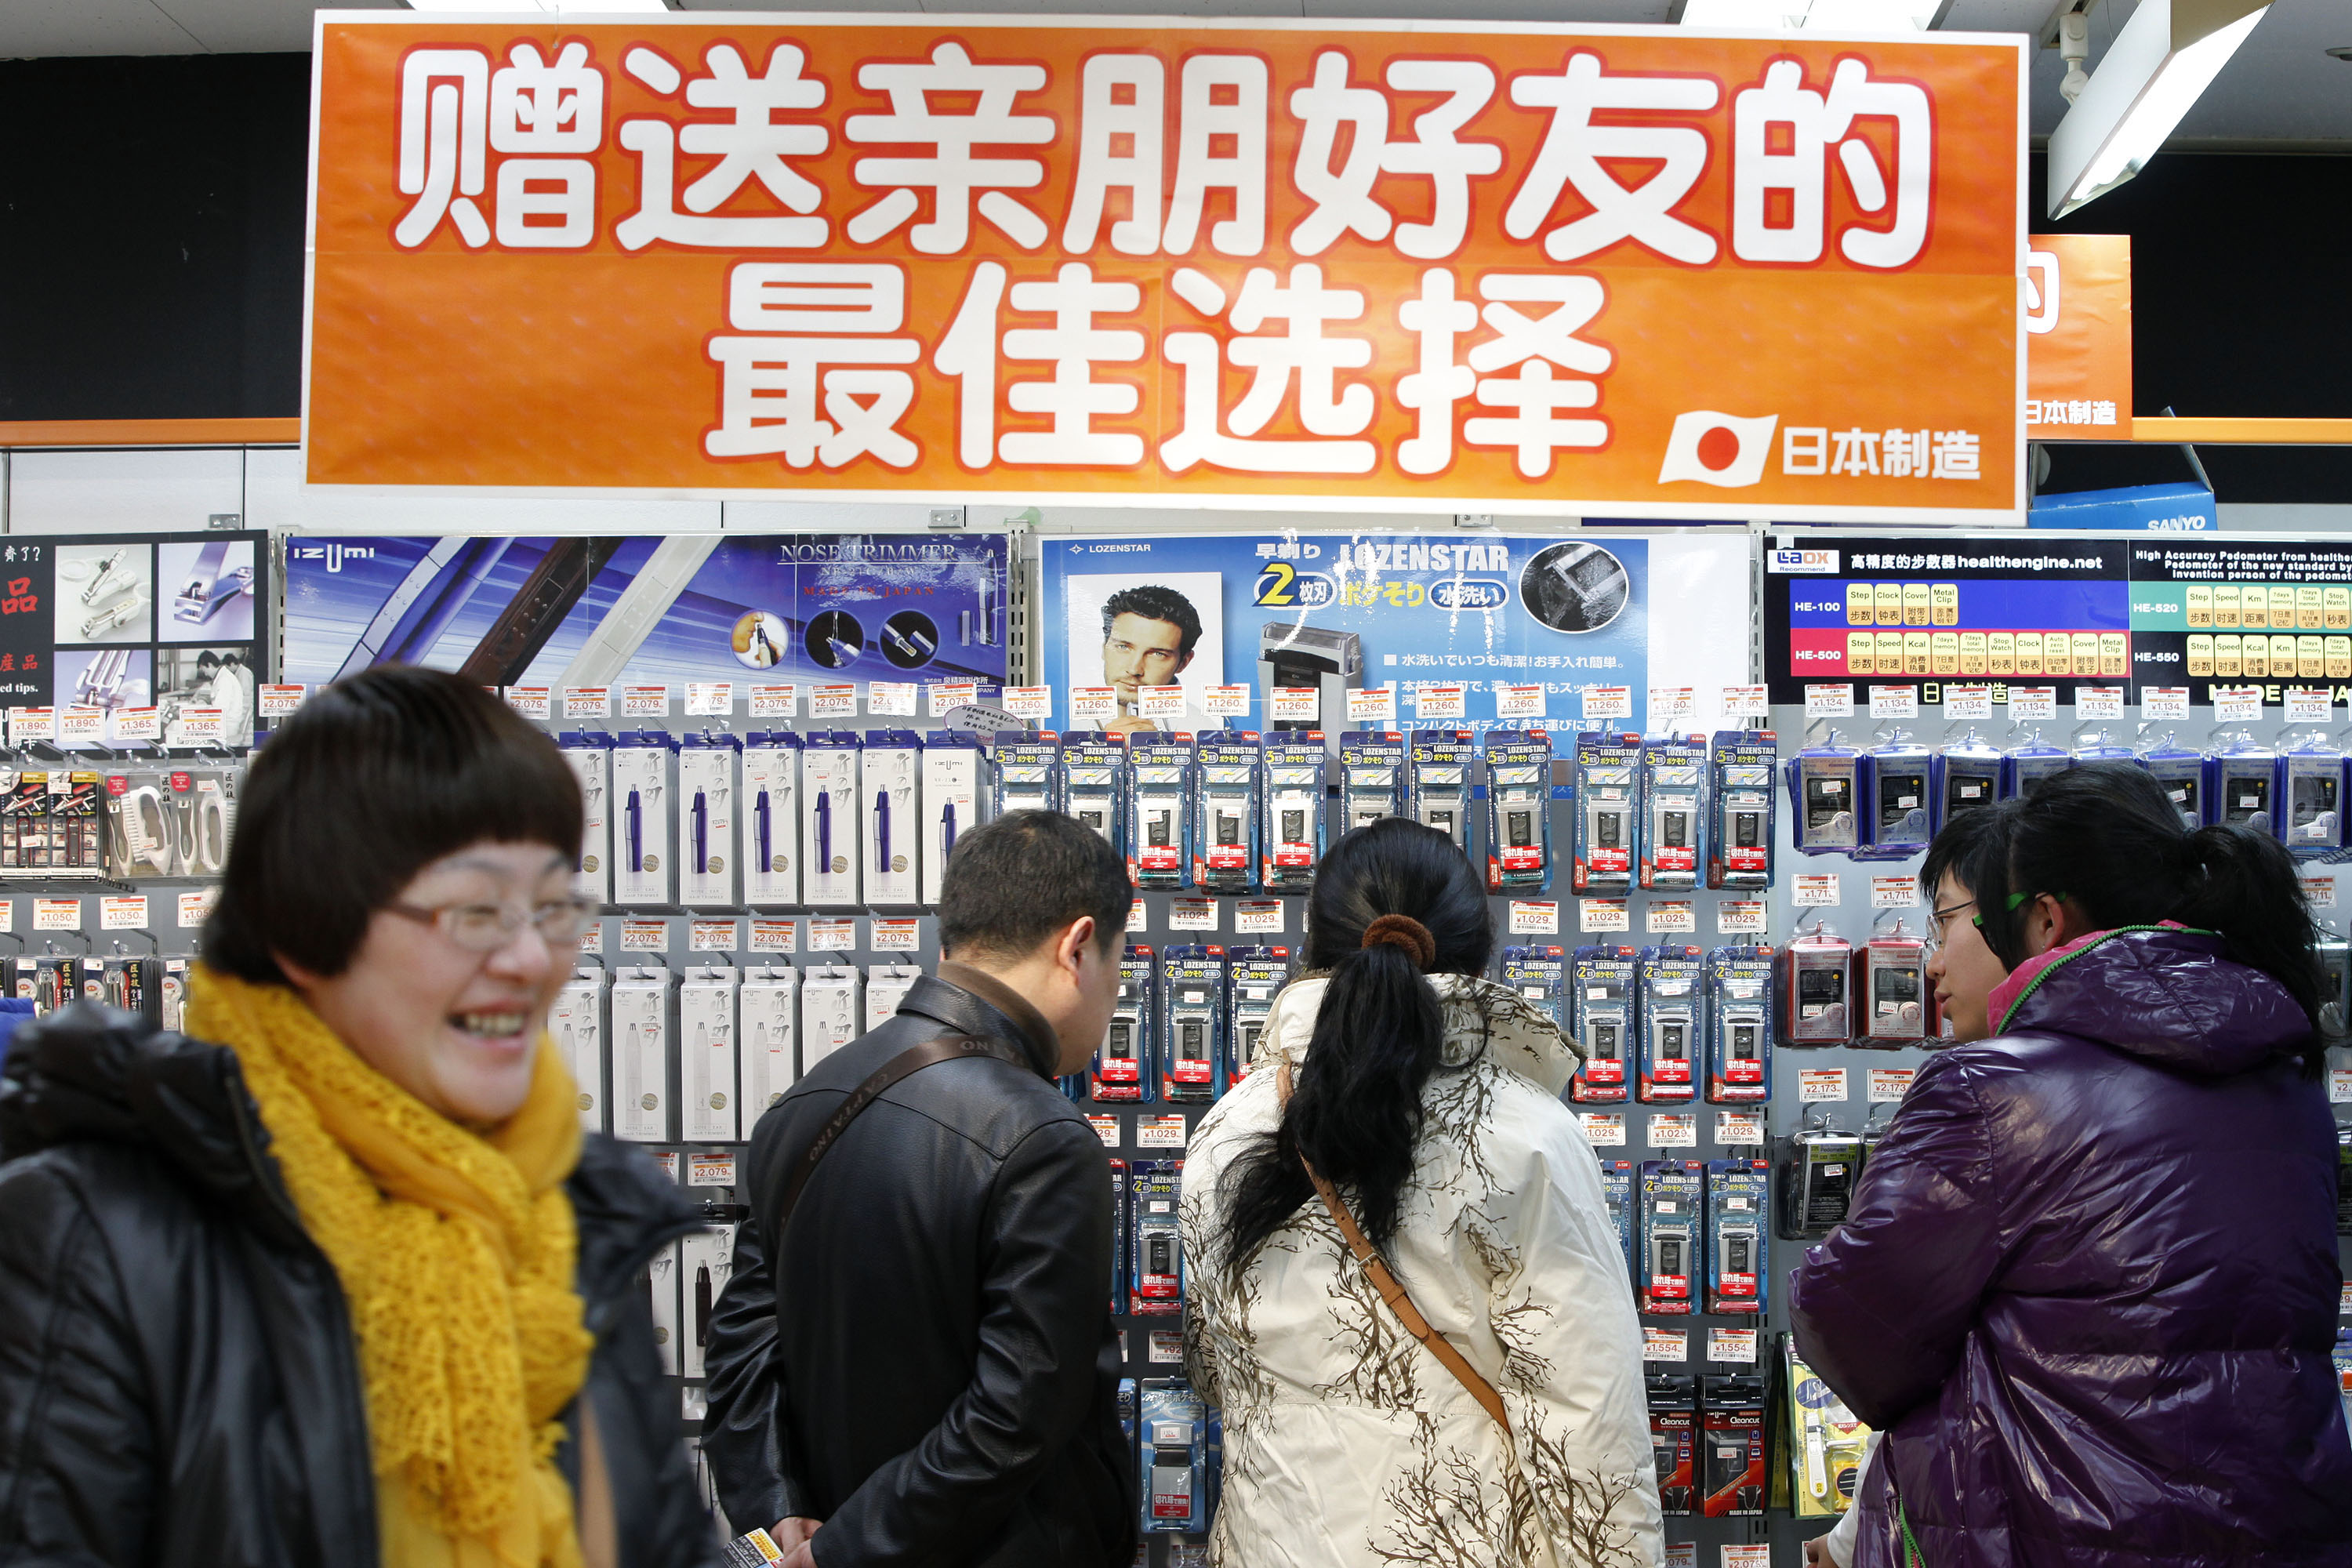 Chinese tourists browse through a Laox electronics store in Tokyo's Akihabara district on Jan. 23, 2012. | BLOOMBERG